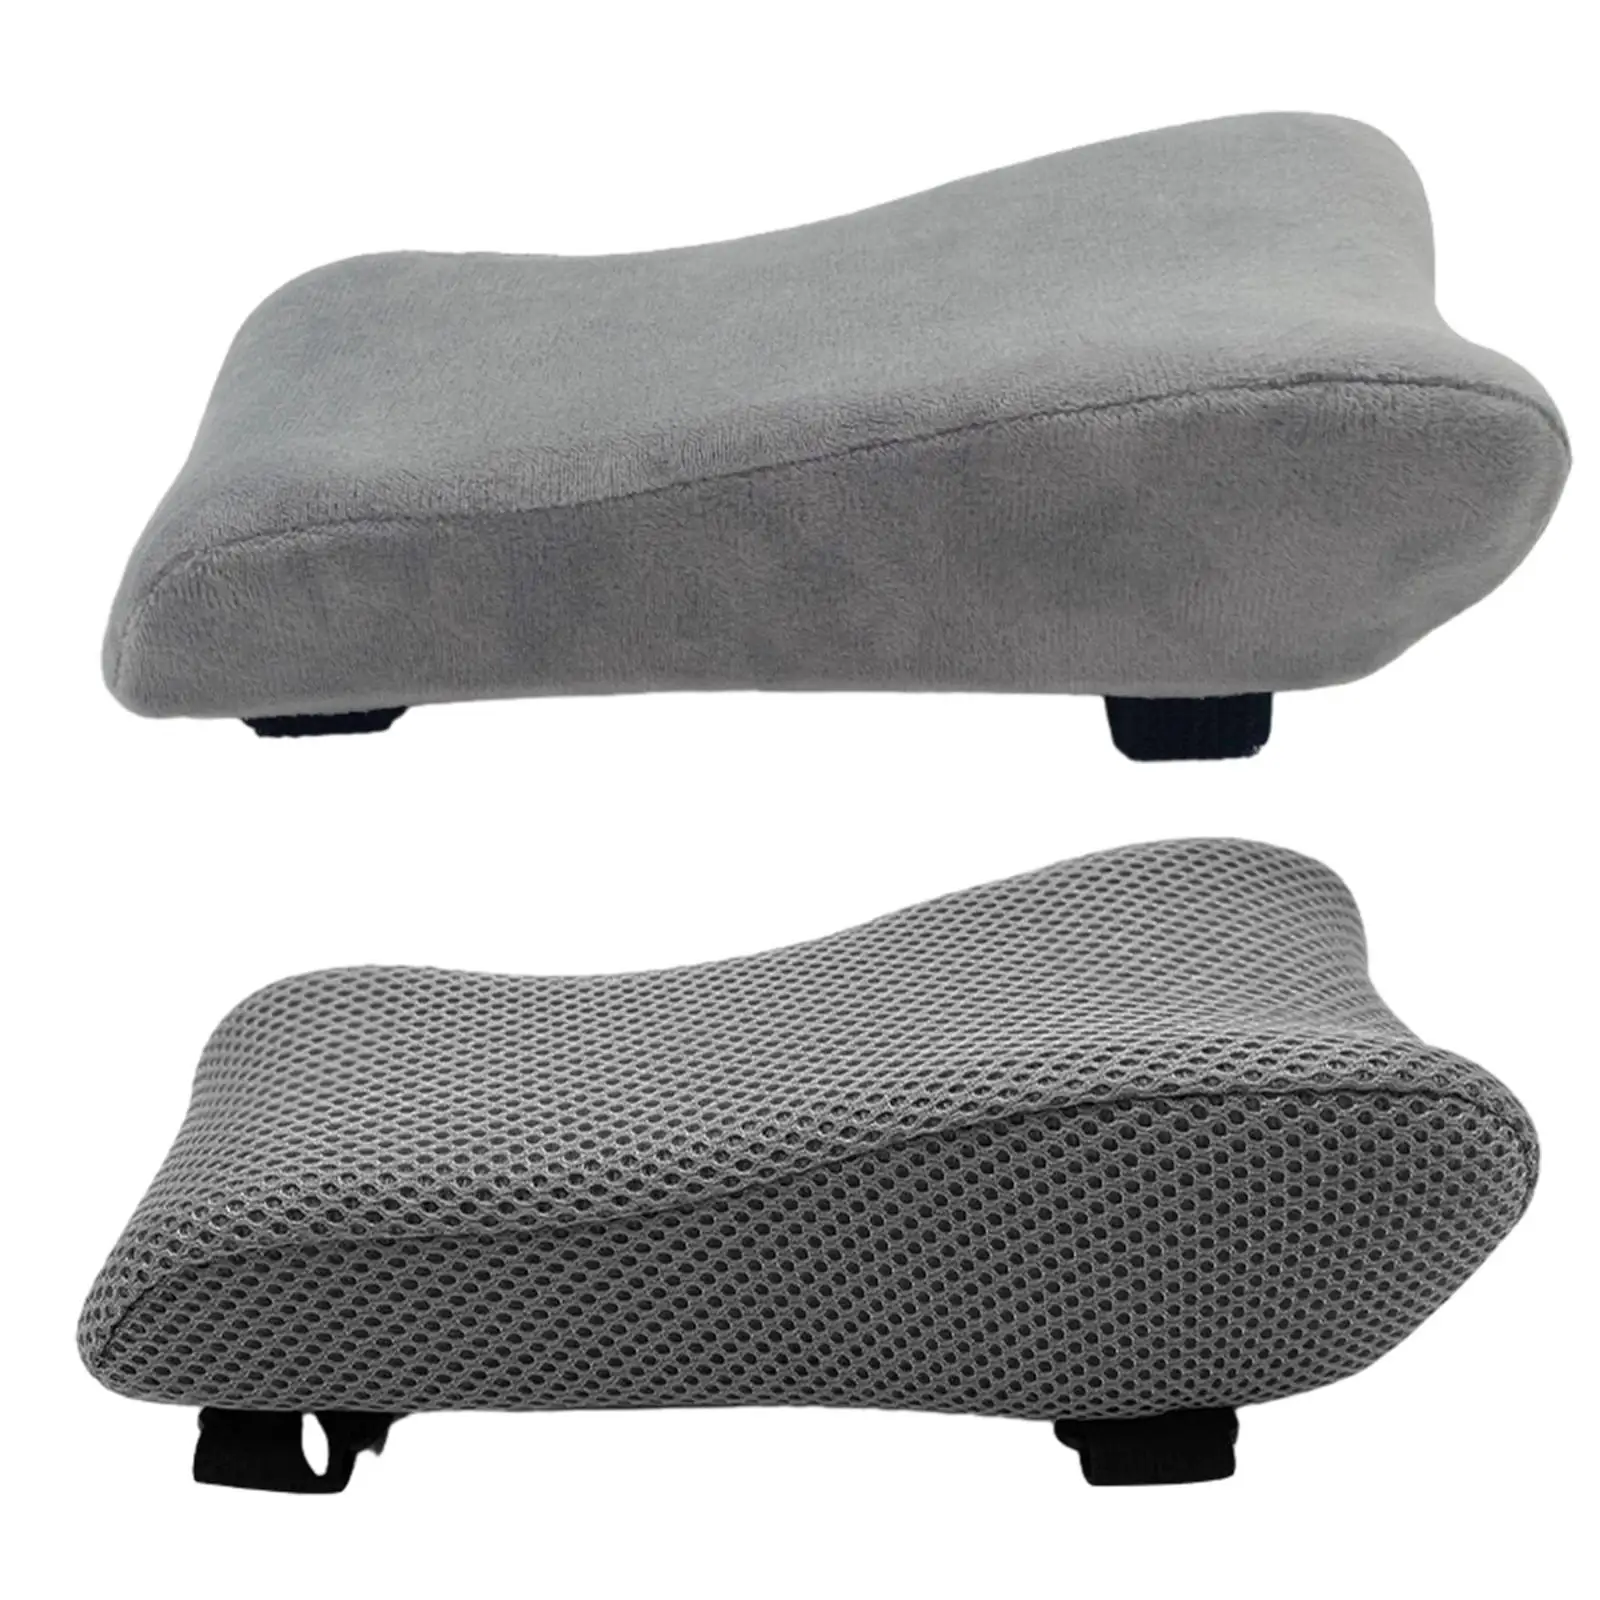 Arm Pads Elbow Pads Office Lightweight Chair Arm Rest Cover Zipper Cover